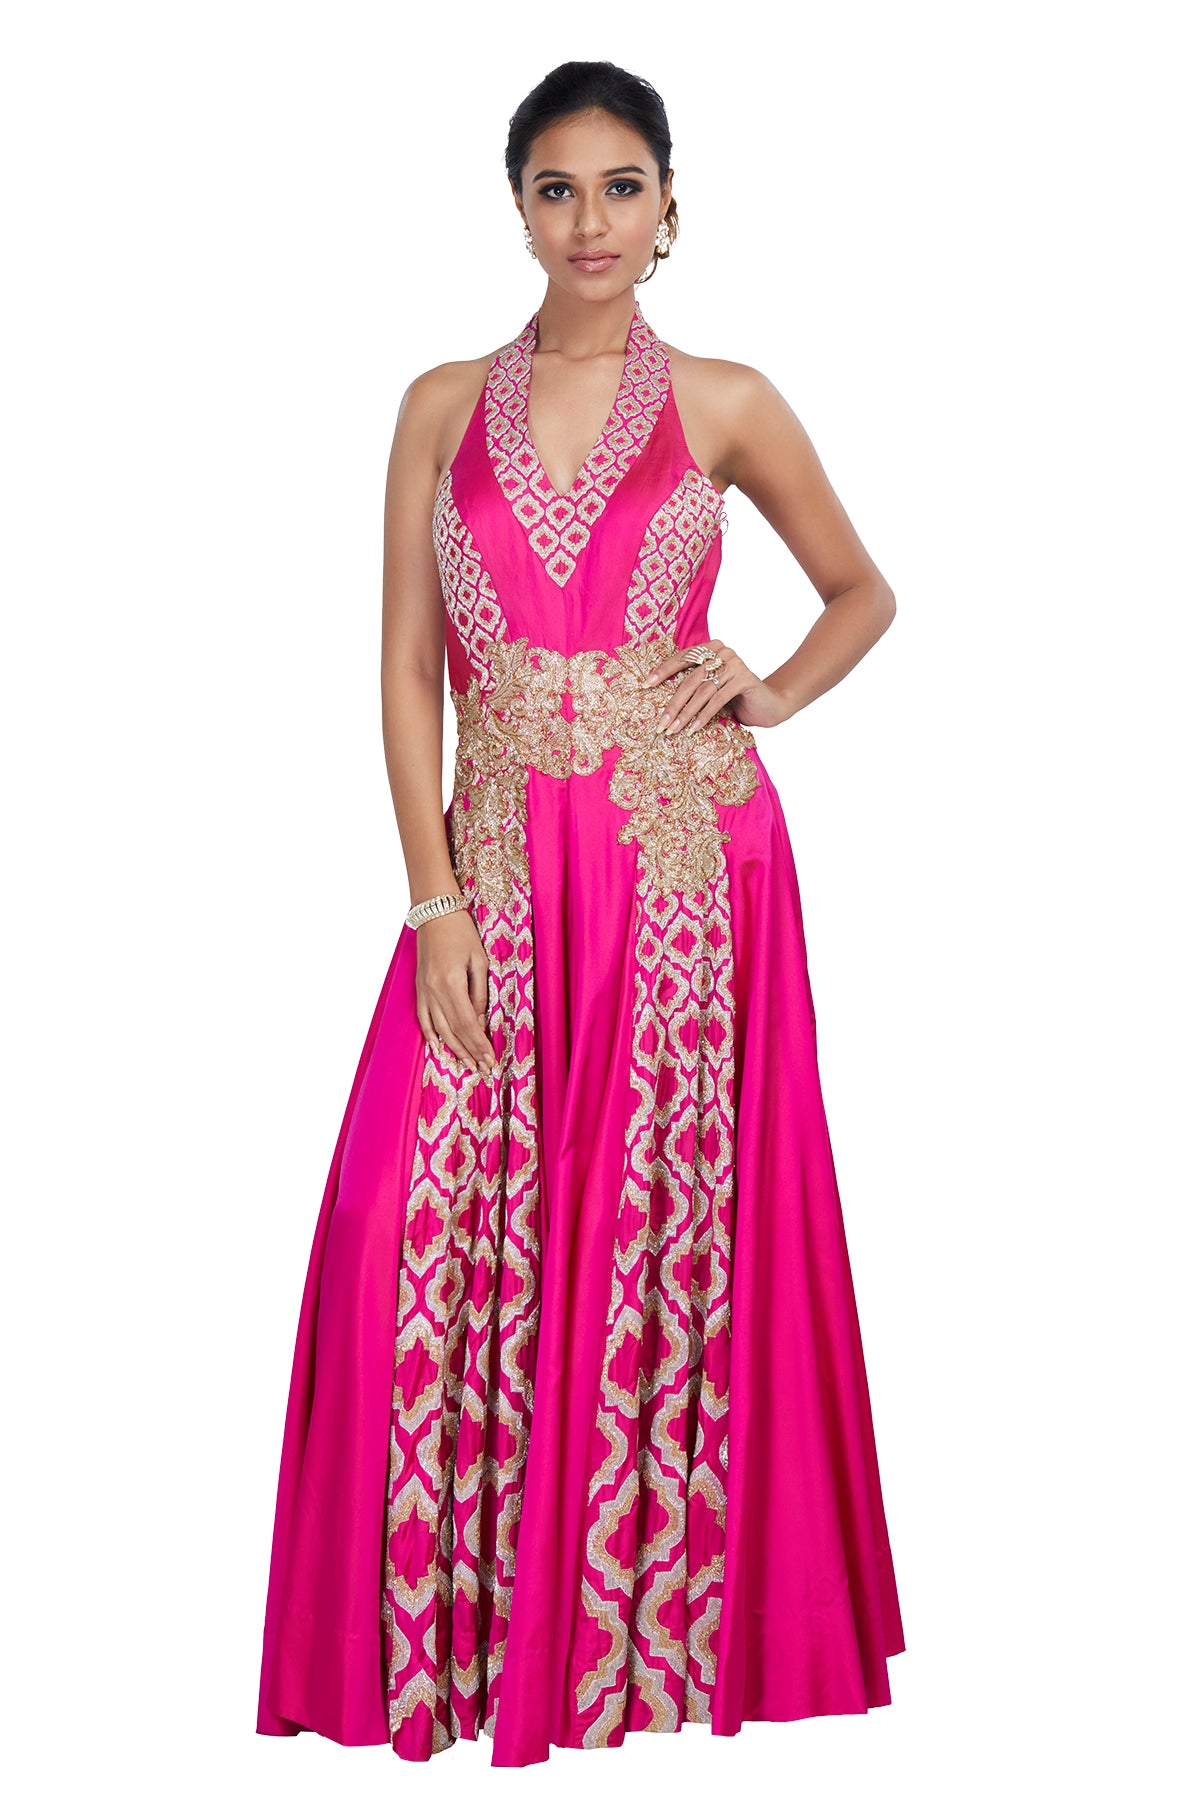 We pinky swear that this one's a keeper! Write your own Cinderella story in this pink halter two-tone silk & skin colour net down with gold & silver kardana embroidery. This one is weaved to entice wonder.